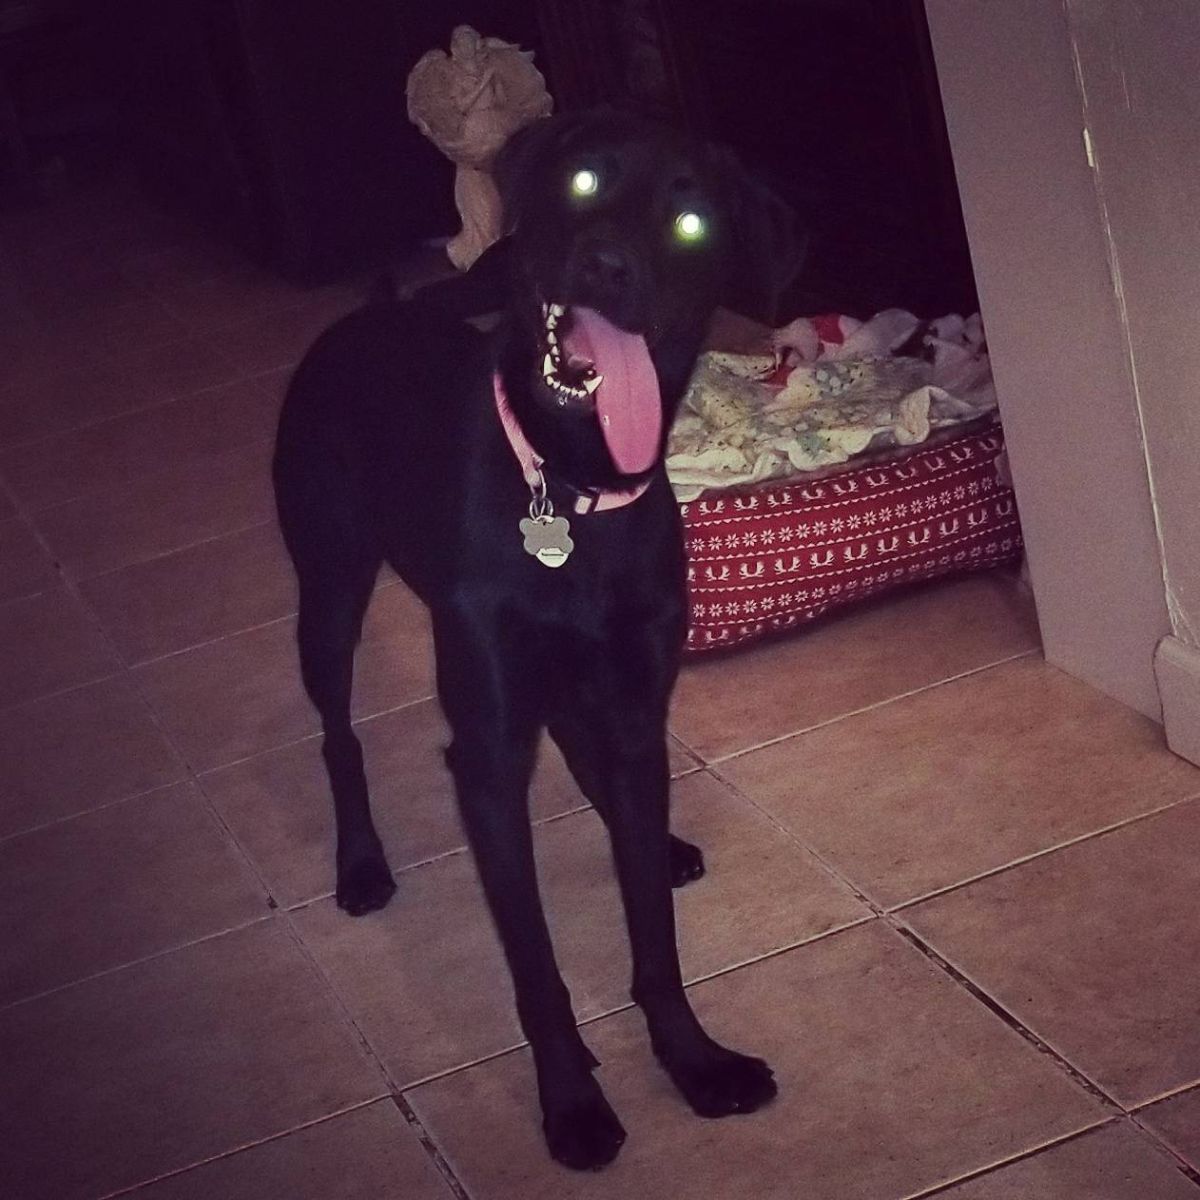 black dog with white eyes from camera flash and the tongue sticking out